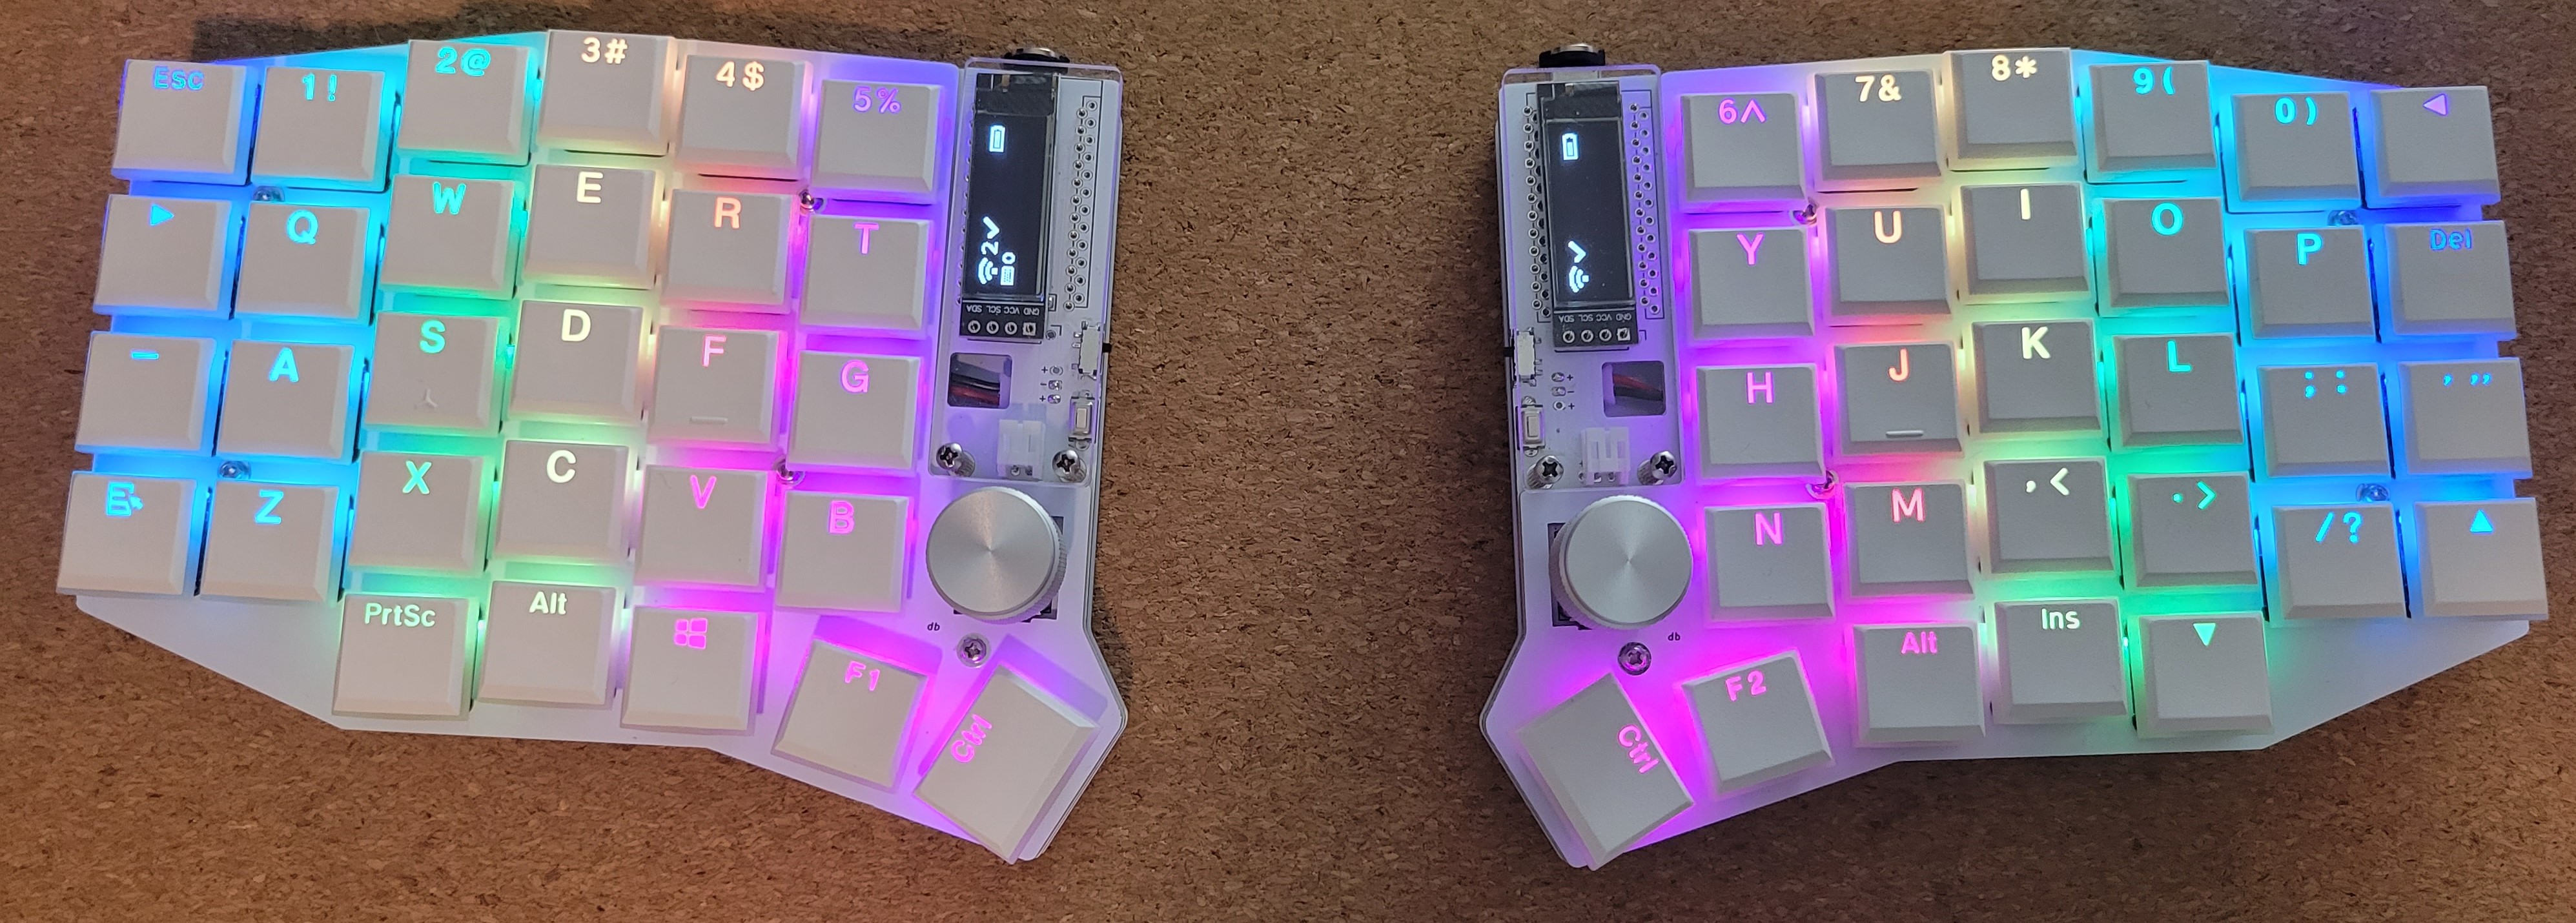 Sofle Choc Wireless Keyboard with dual encoders and RGB LEDS